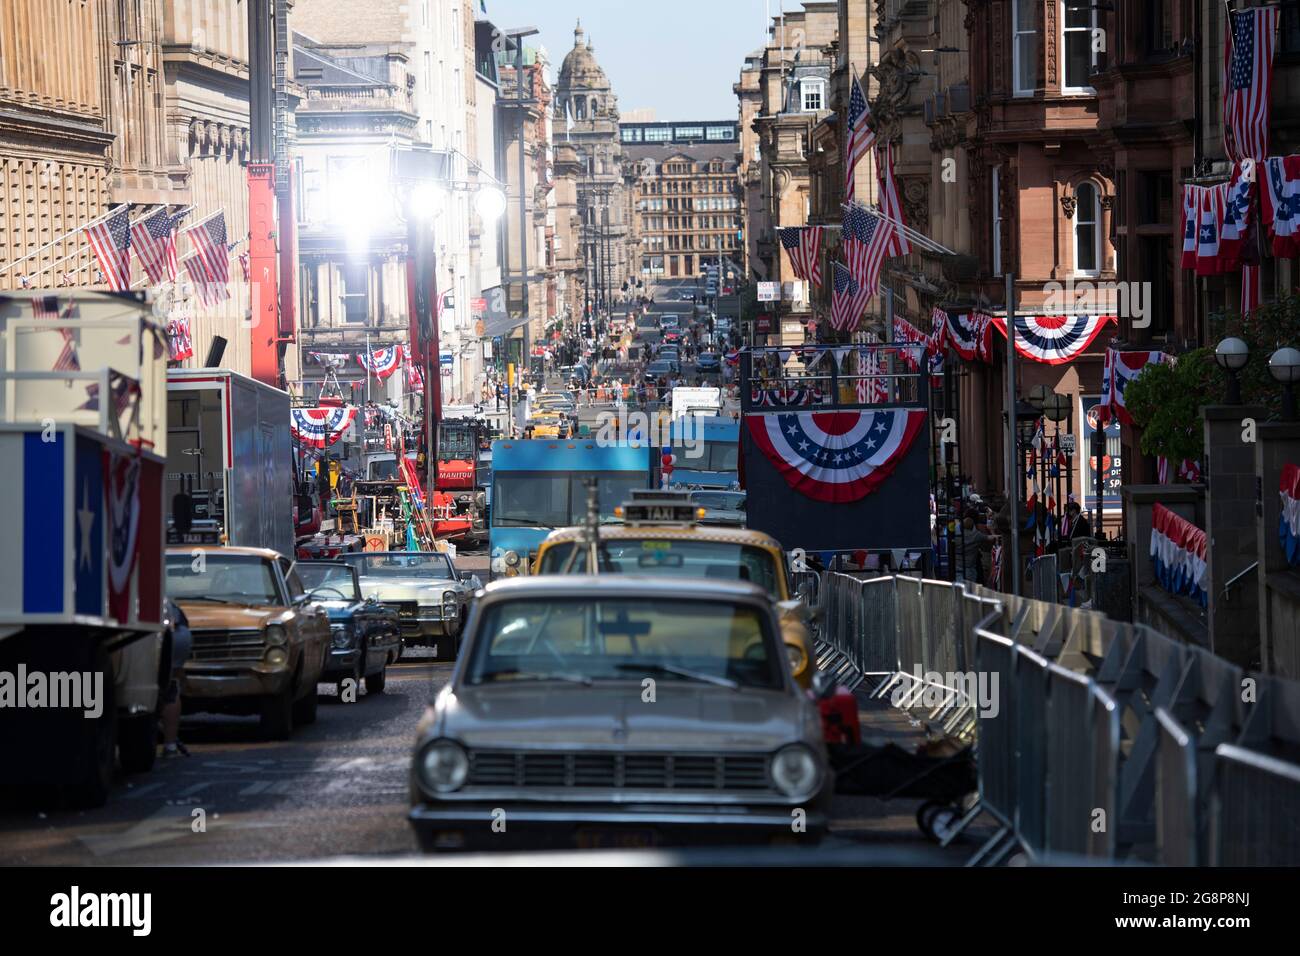 Glasgow, Scotland, UK. 21 July 2021.  PICTURED: A view down St Vincent street showing parked 1950/60s cars on the film set with a gantry of extremely bright set lights. Filming on the set of Indiana Jones 5 in the middle of Glasgow city centre as the Hollywood blockbuster sets up Glasgow as New York City. A full production can be seen, with a large cast, producers and extras. The city centre has been changed so that all the shop fronts and building look like 1959 America. Credit: Colin Fisher Stock Photo